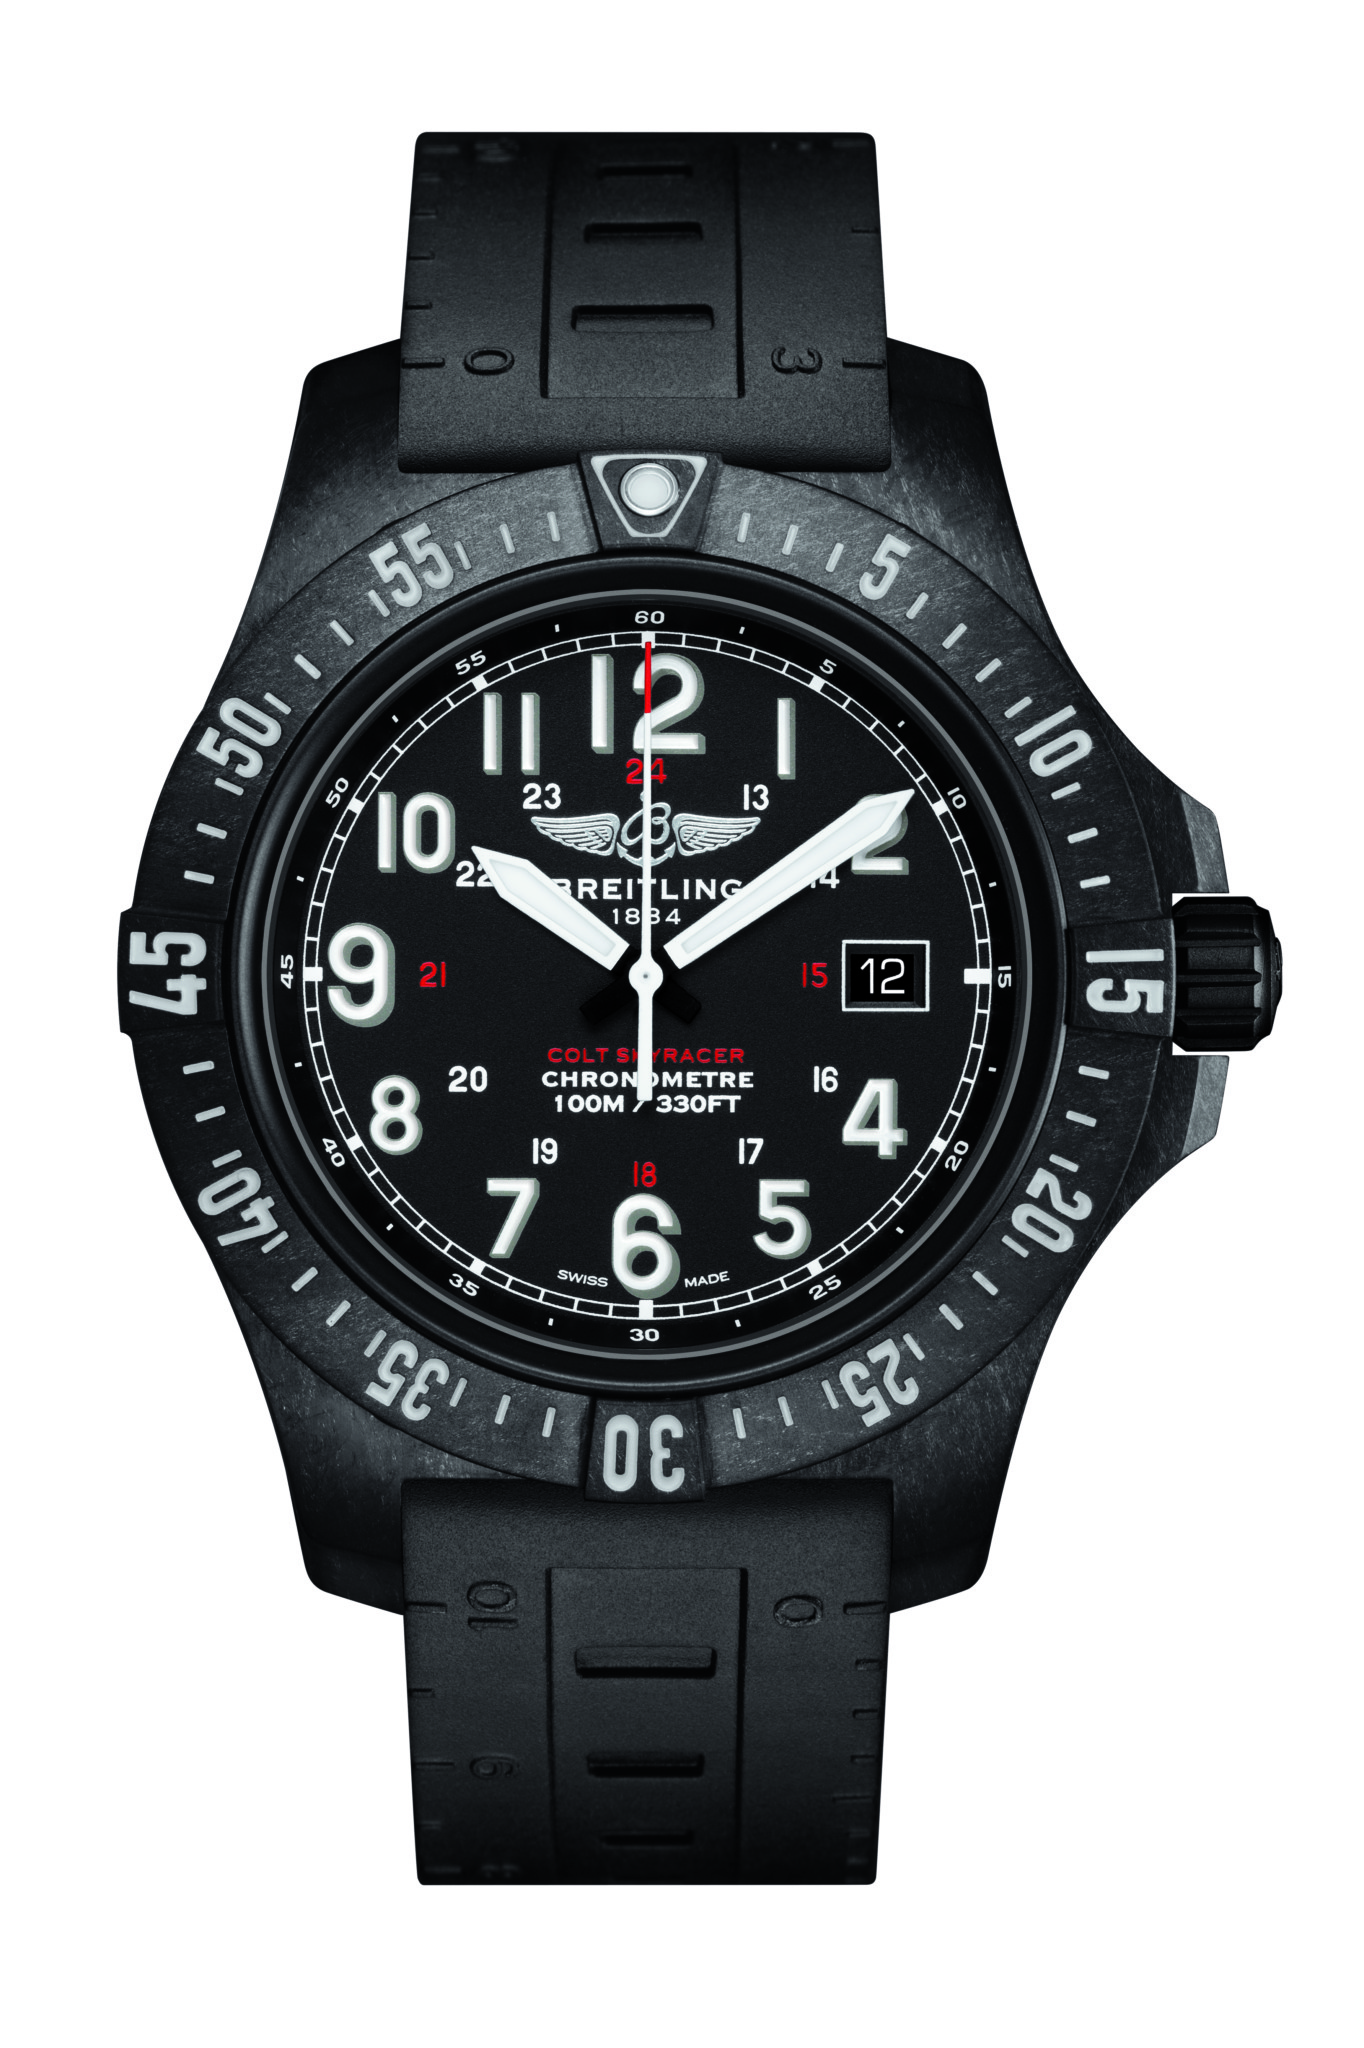 The breitling colt skyracer was admired by mr toulson as a commercial winner in the making.